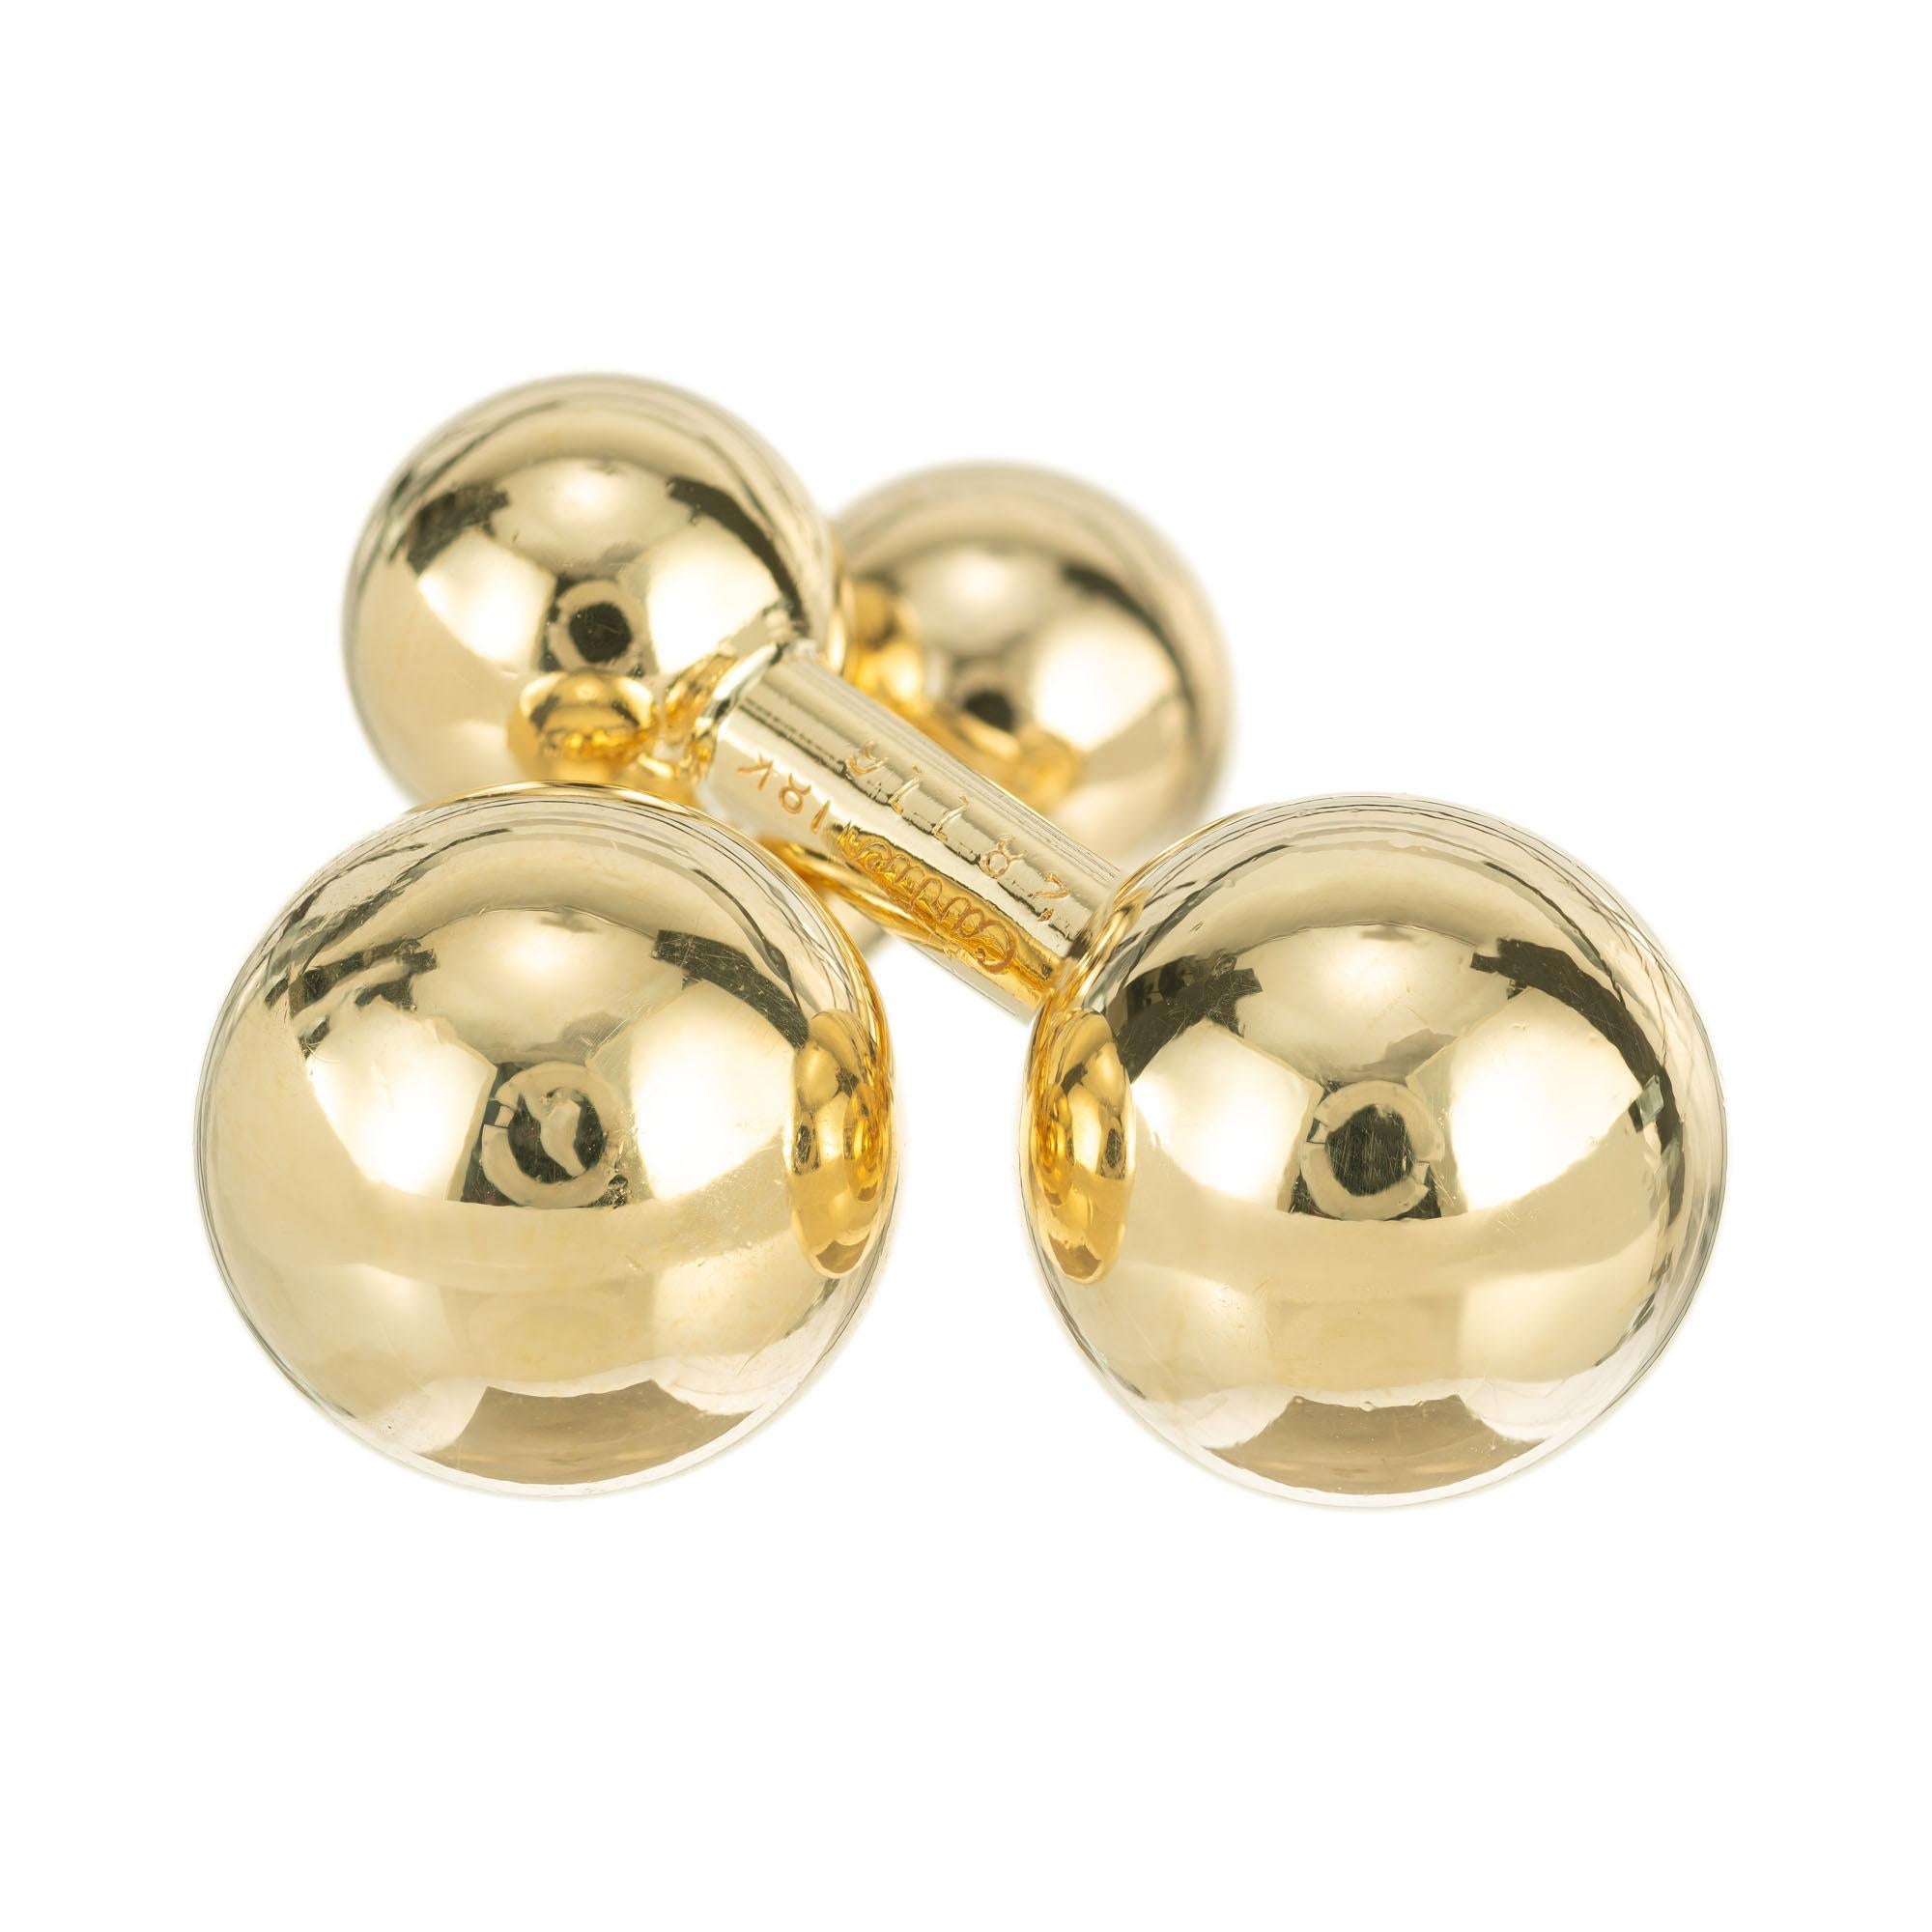 Circa 1940 Cartier 18k Yellow gold barbell double sided cufflinks.

18k yellow gold
Stamped: 18k
Hallmark: Cartier 28116
11.6 grams
Top to bottom: 12.7mm or .5 Inch
Width: 3.6mm or 1.25 Inches
Depth or thickness: 12.7mm
